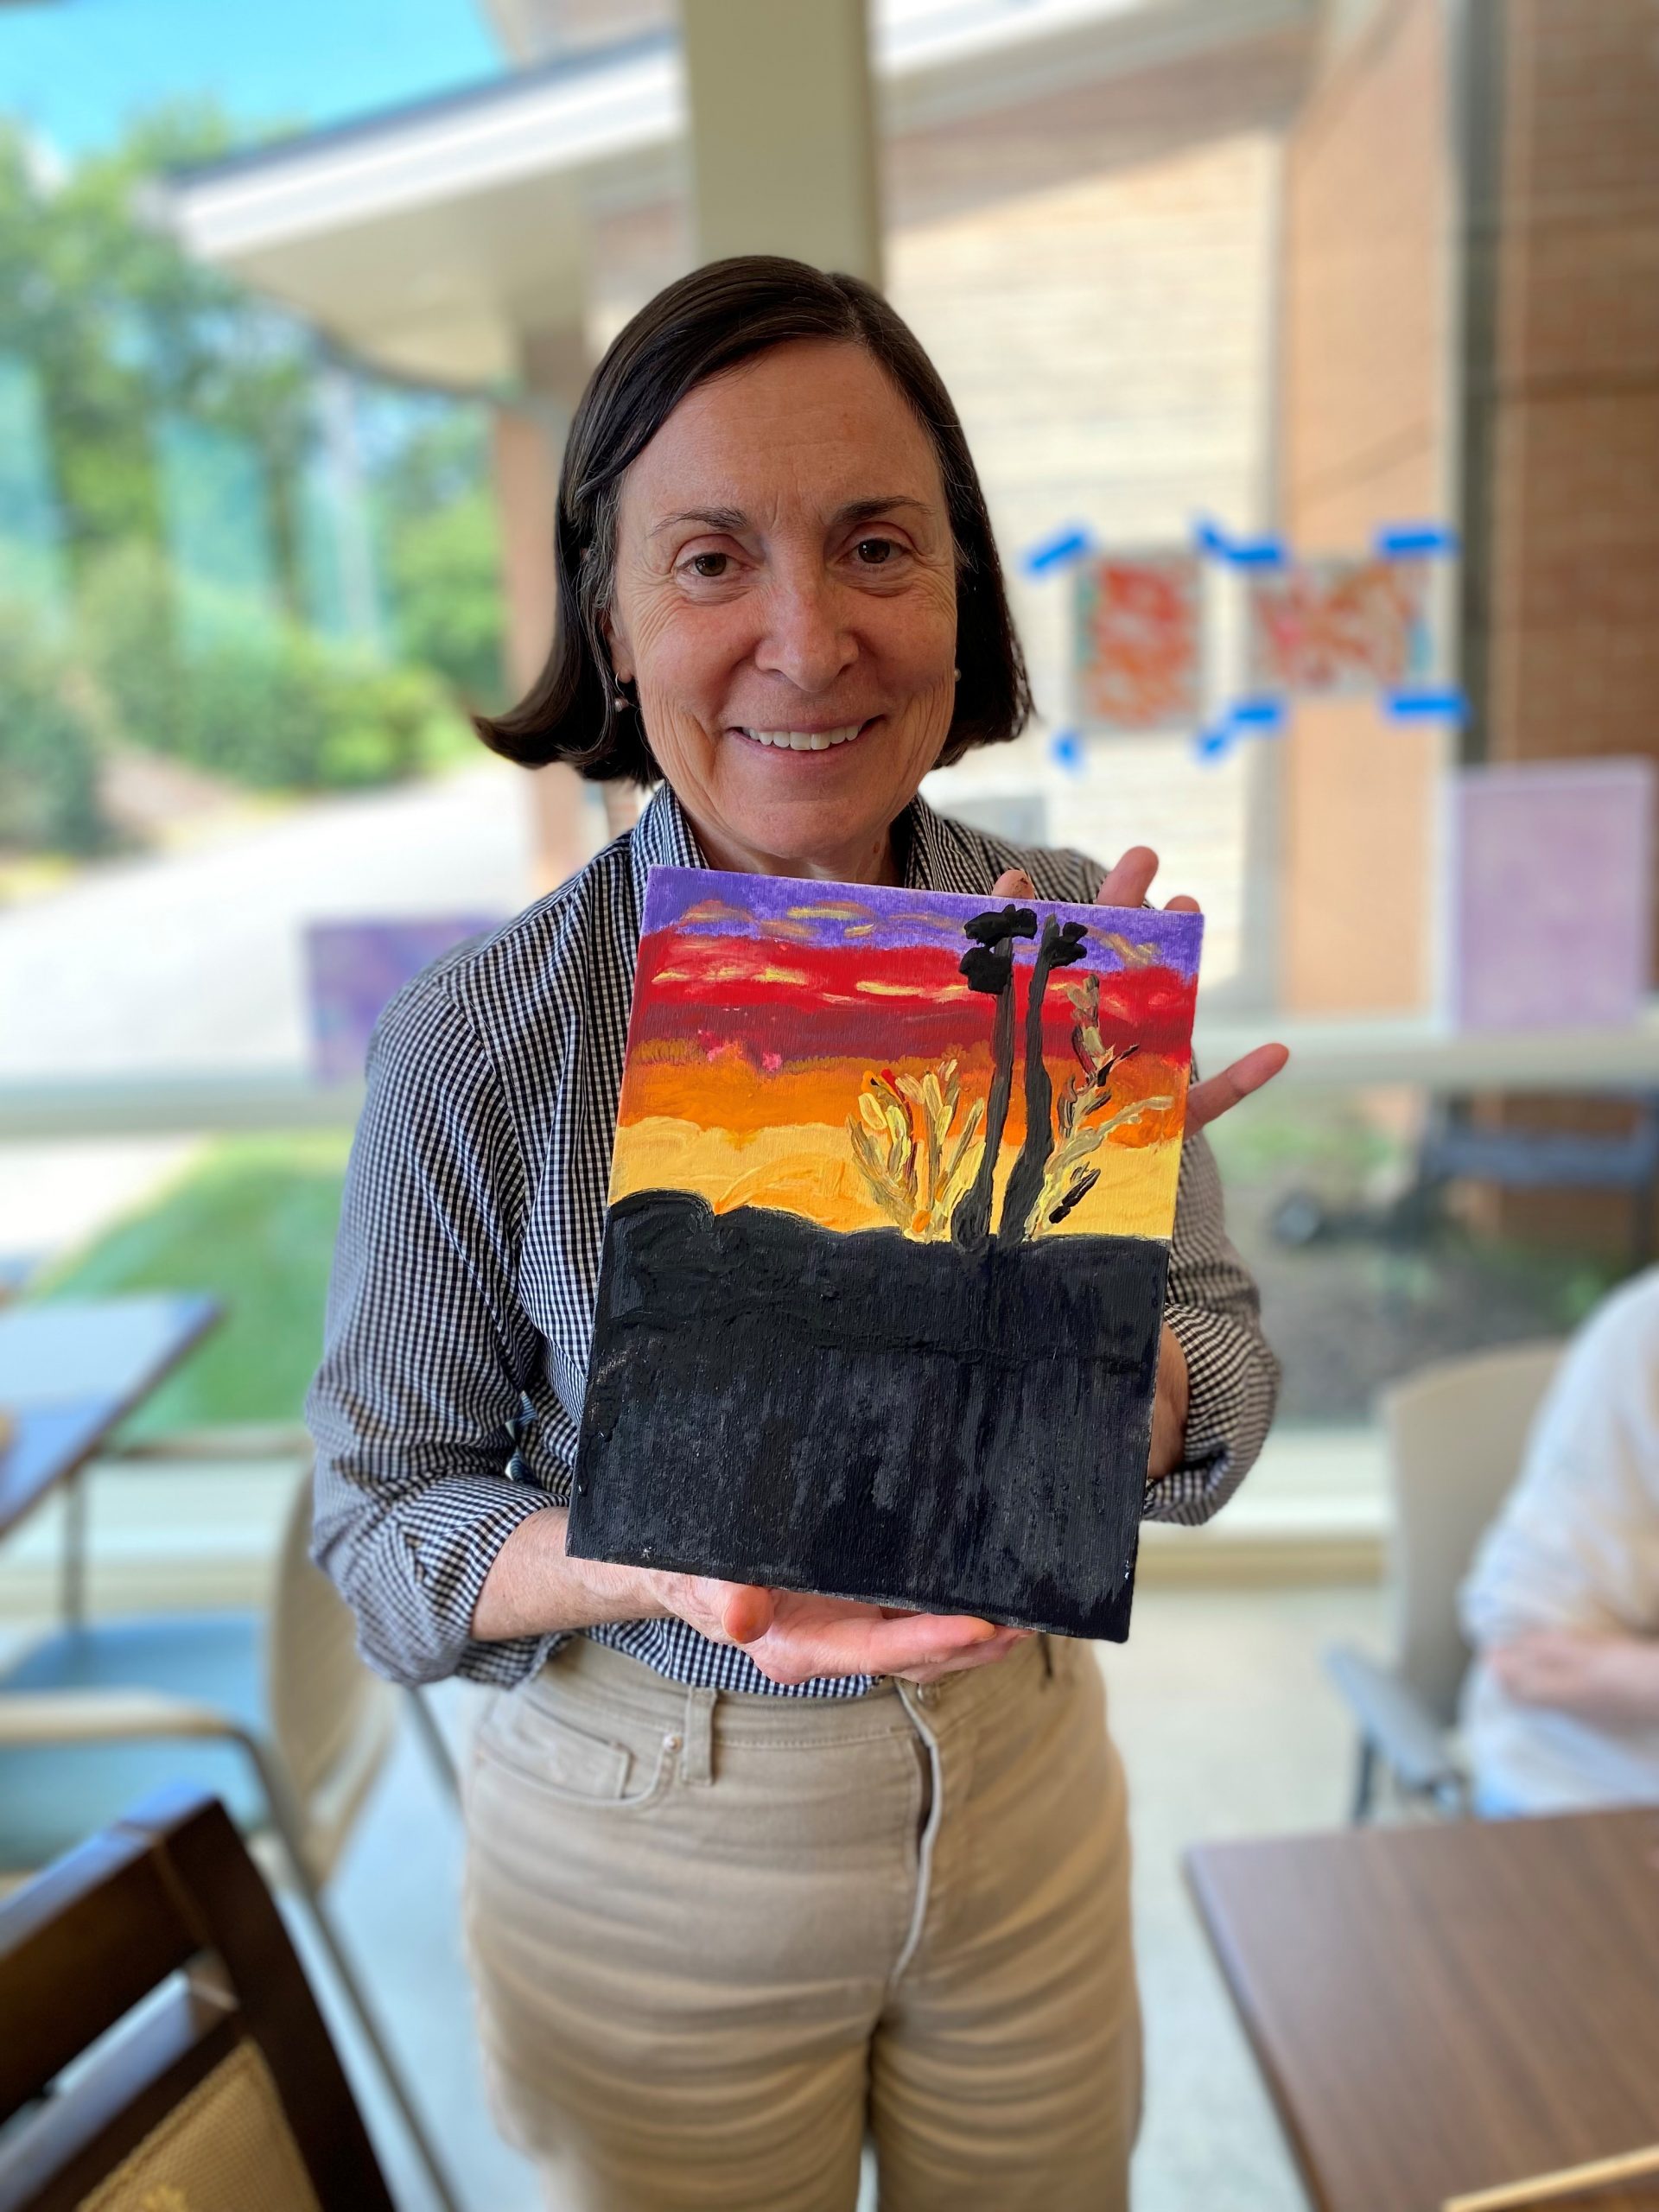 Abe's Garden Club member poses with colorful painting of sunset during art therapy